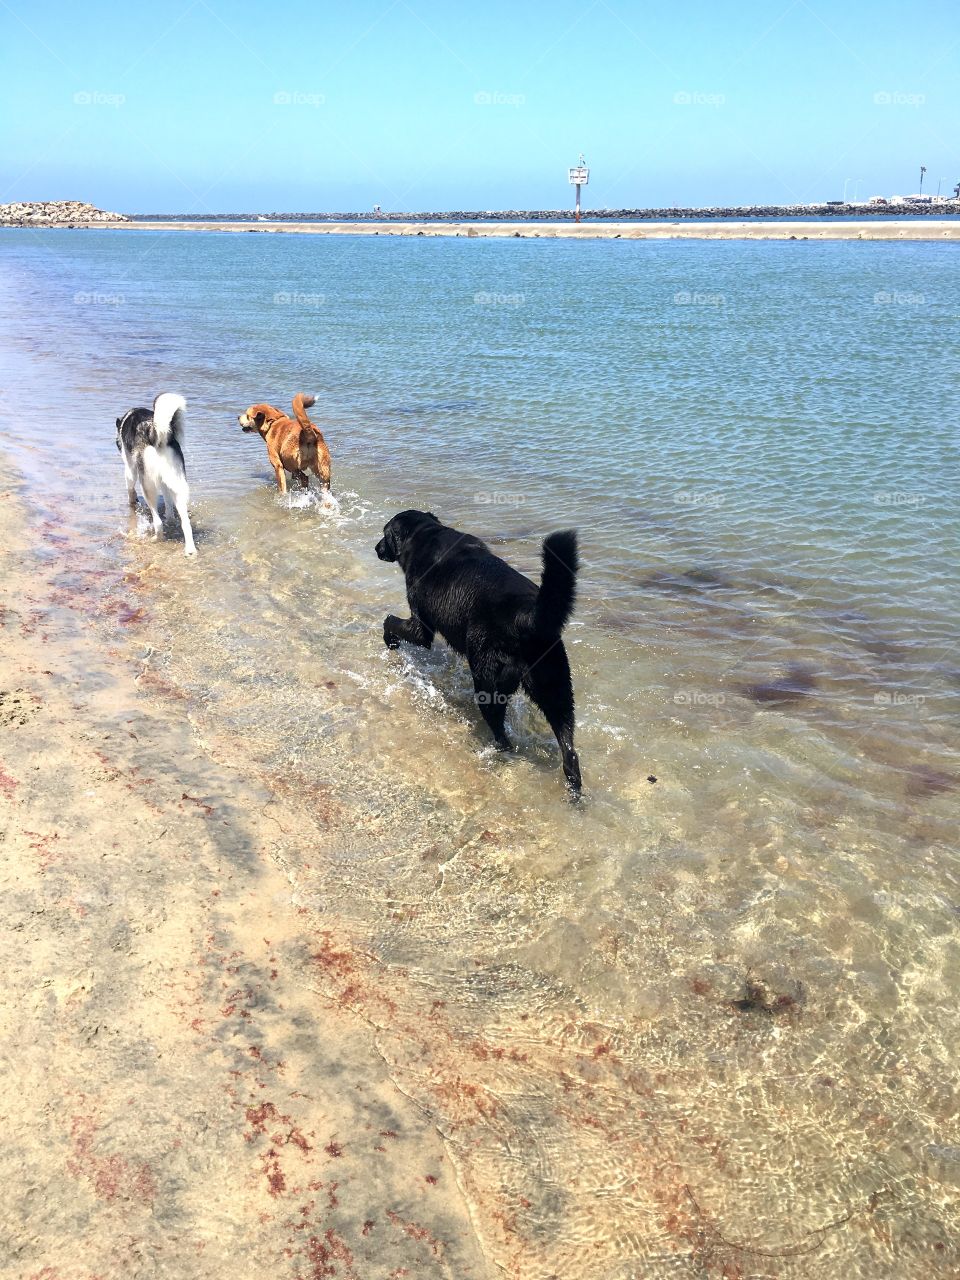 Dogs running in the shallow water at Ocean Beach Dog Beach